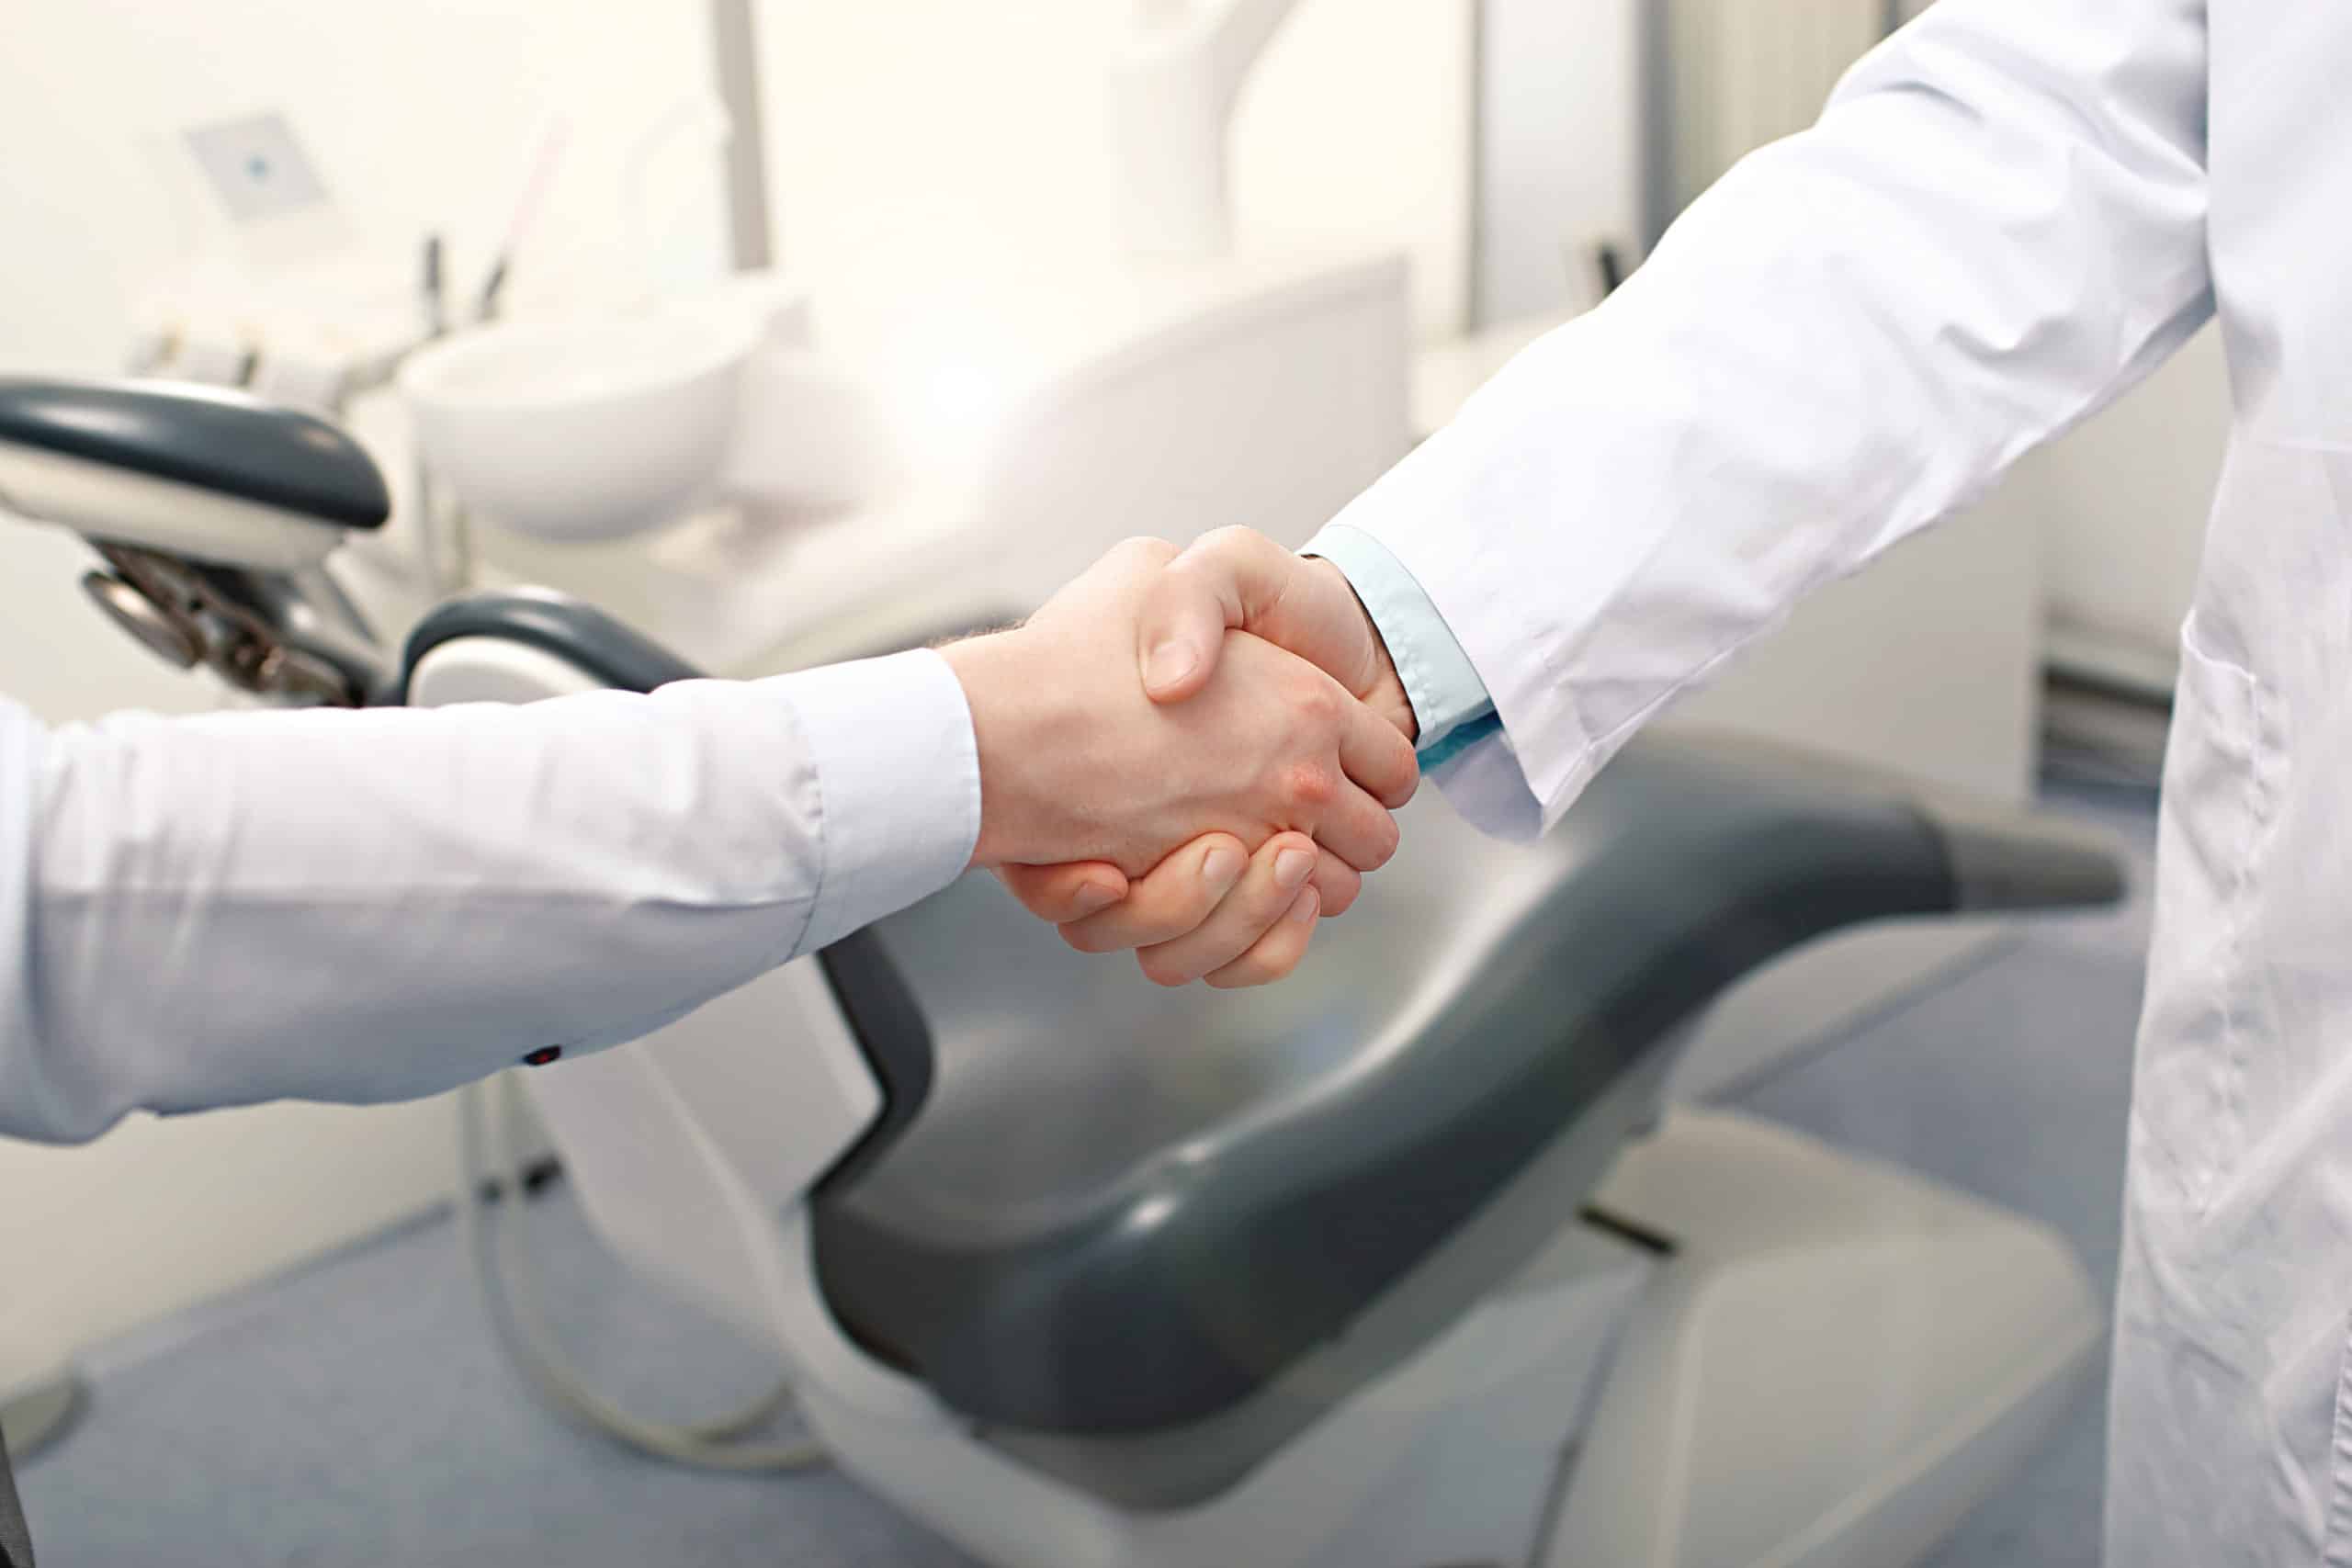 Dentists Shaking Hands